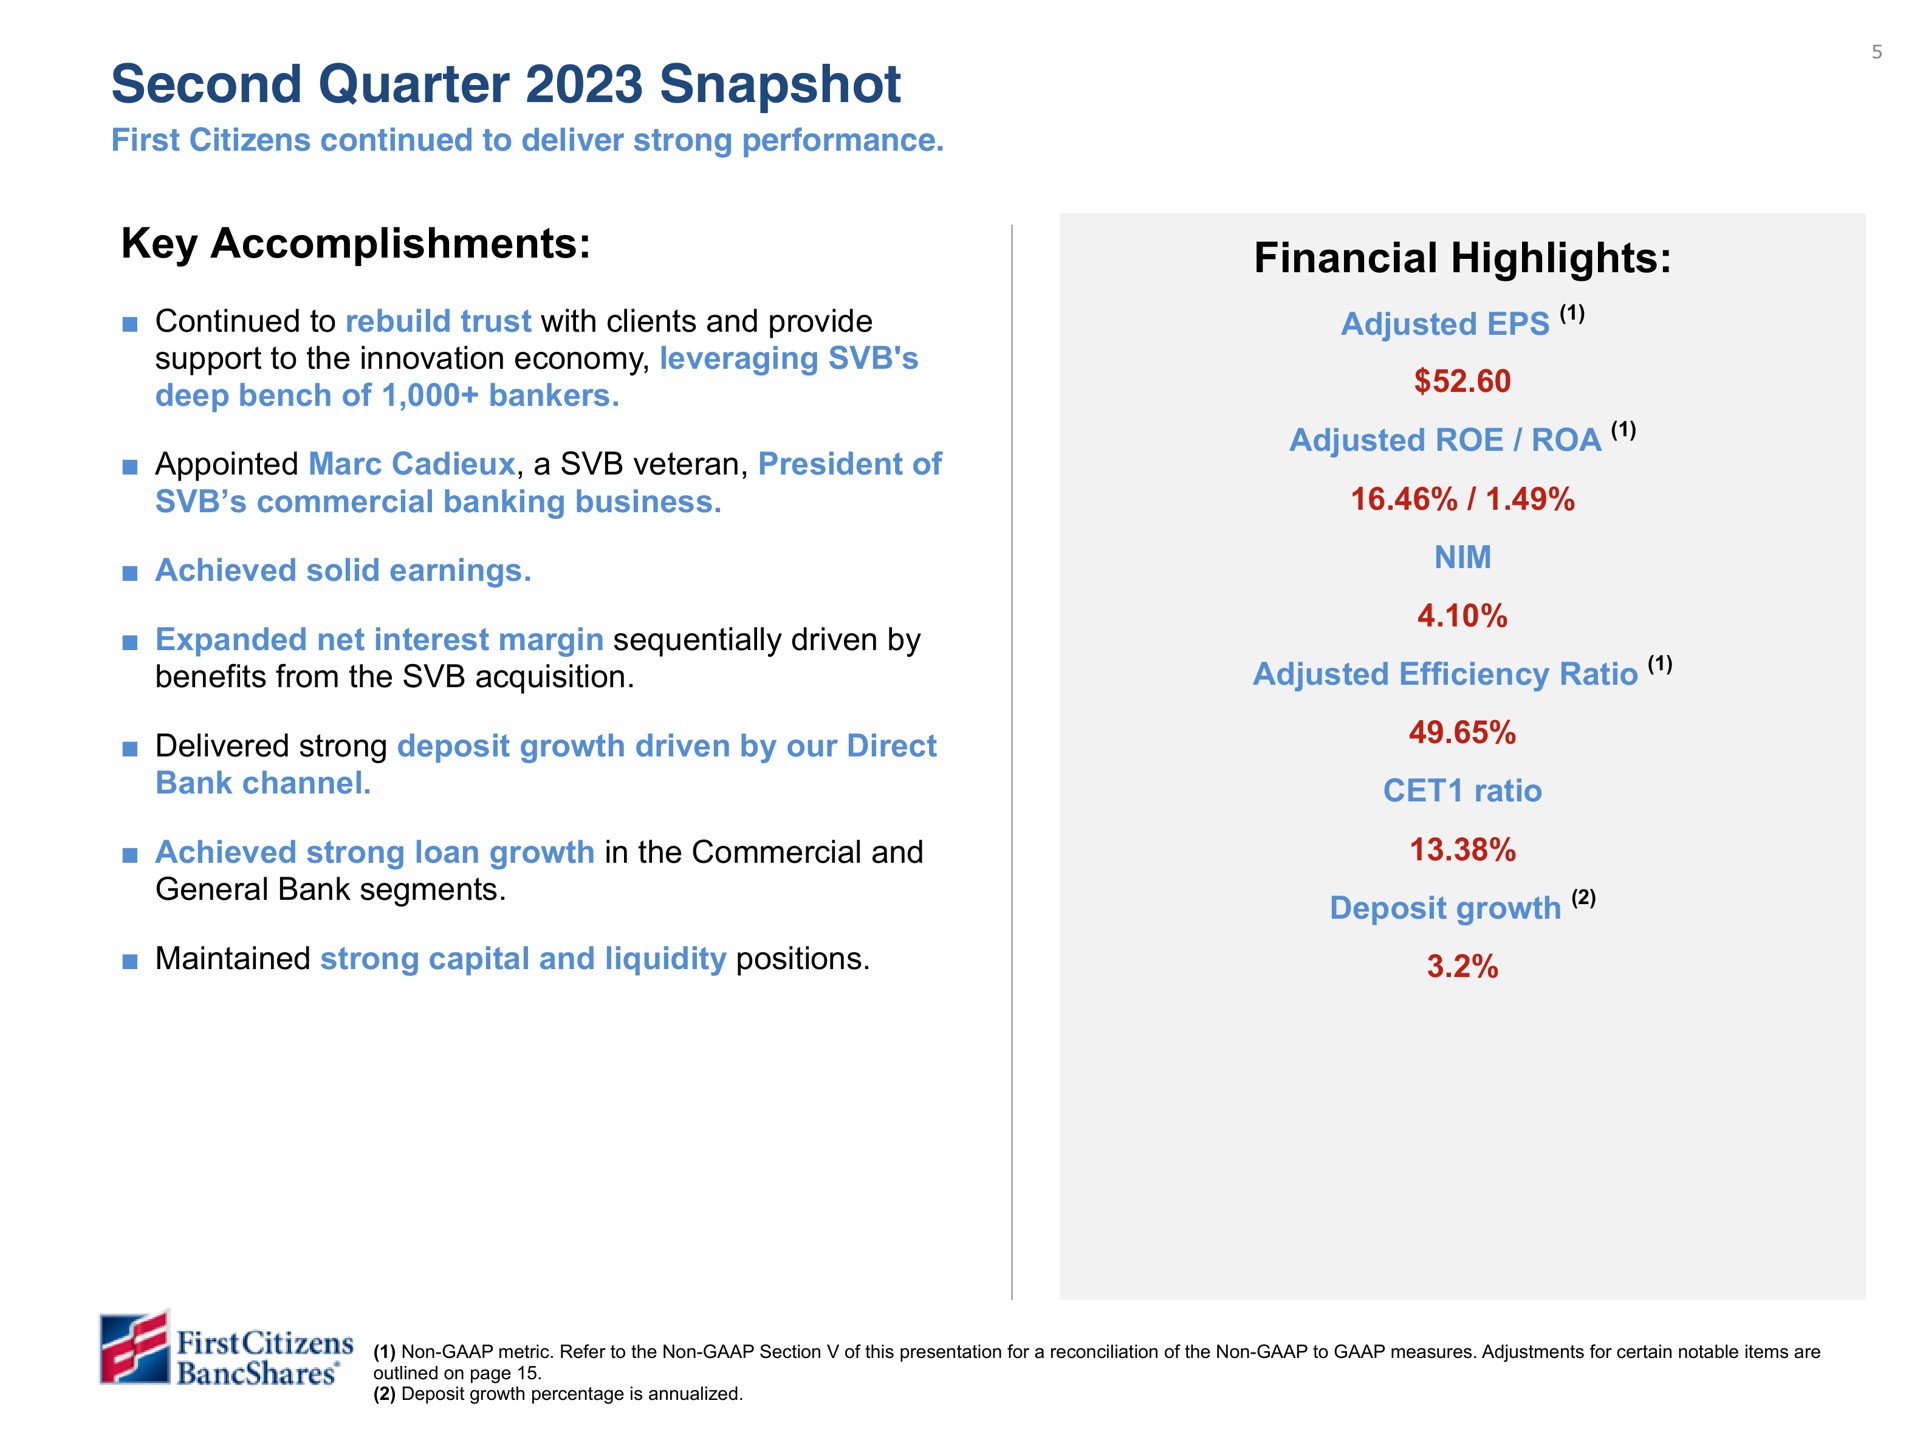 second quarter snapshot key accomplishments financial highlights adjusted roe adjusted efficiency ratio deposit growth | First Citizens BancShares